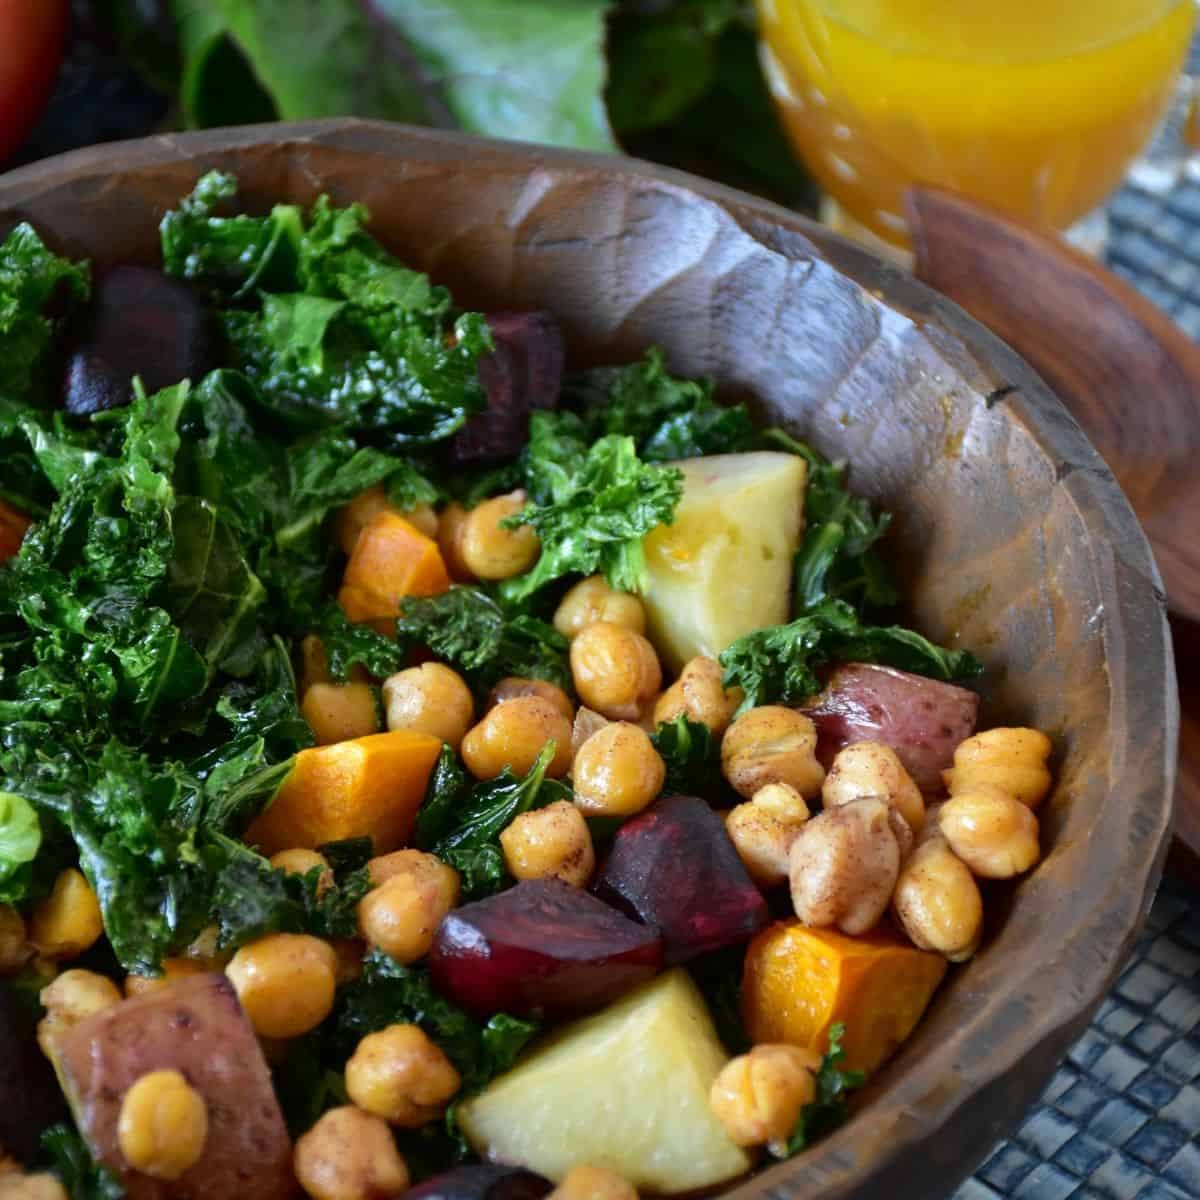 Kale salad in a wooden bowl.